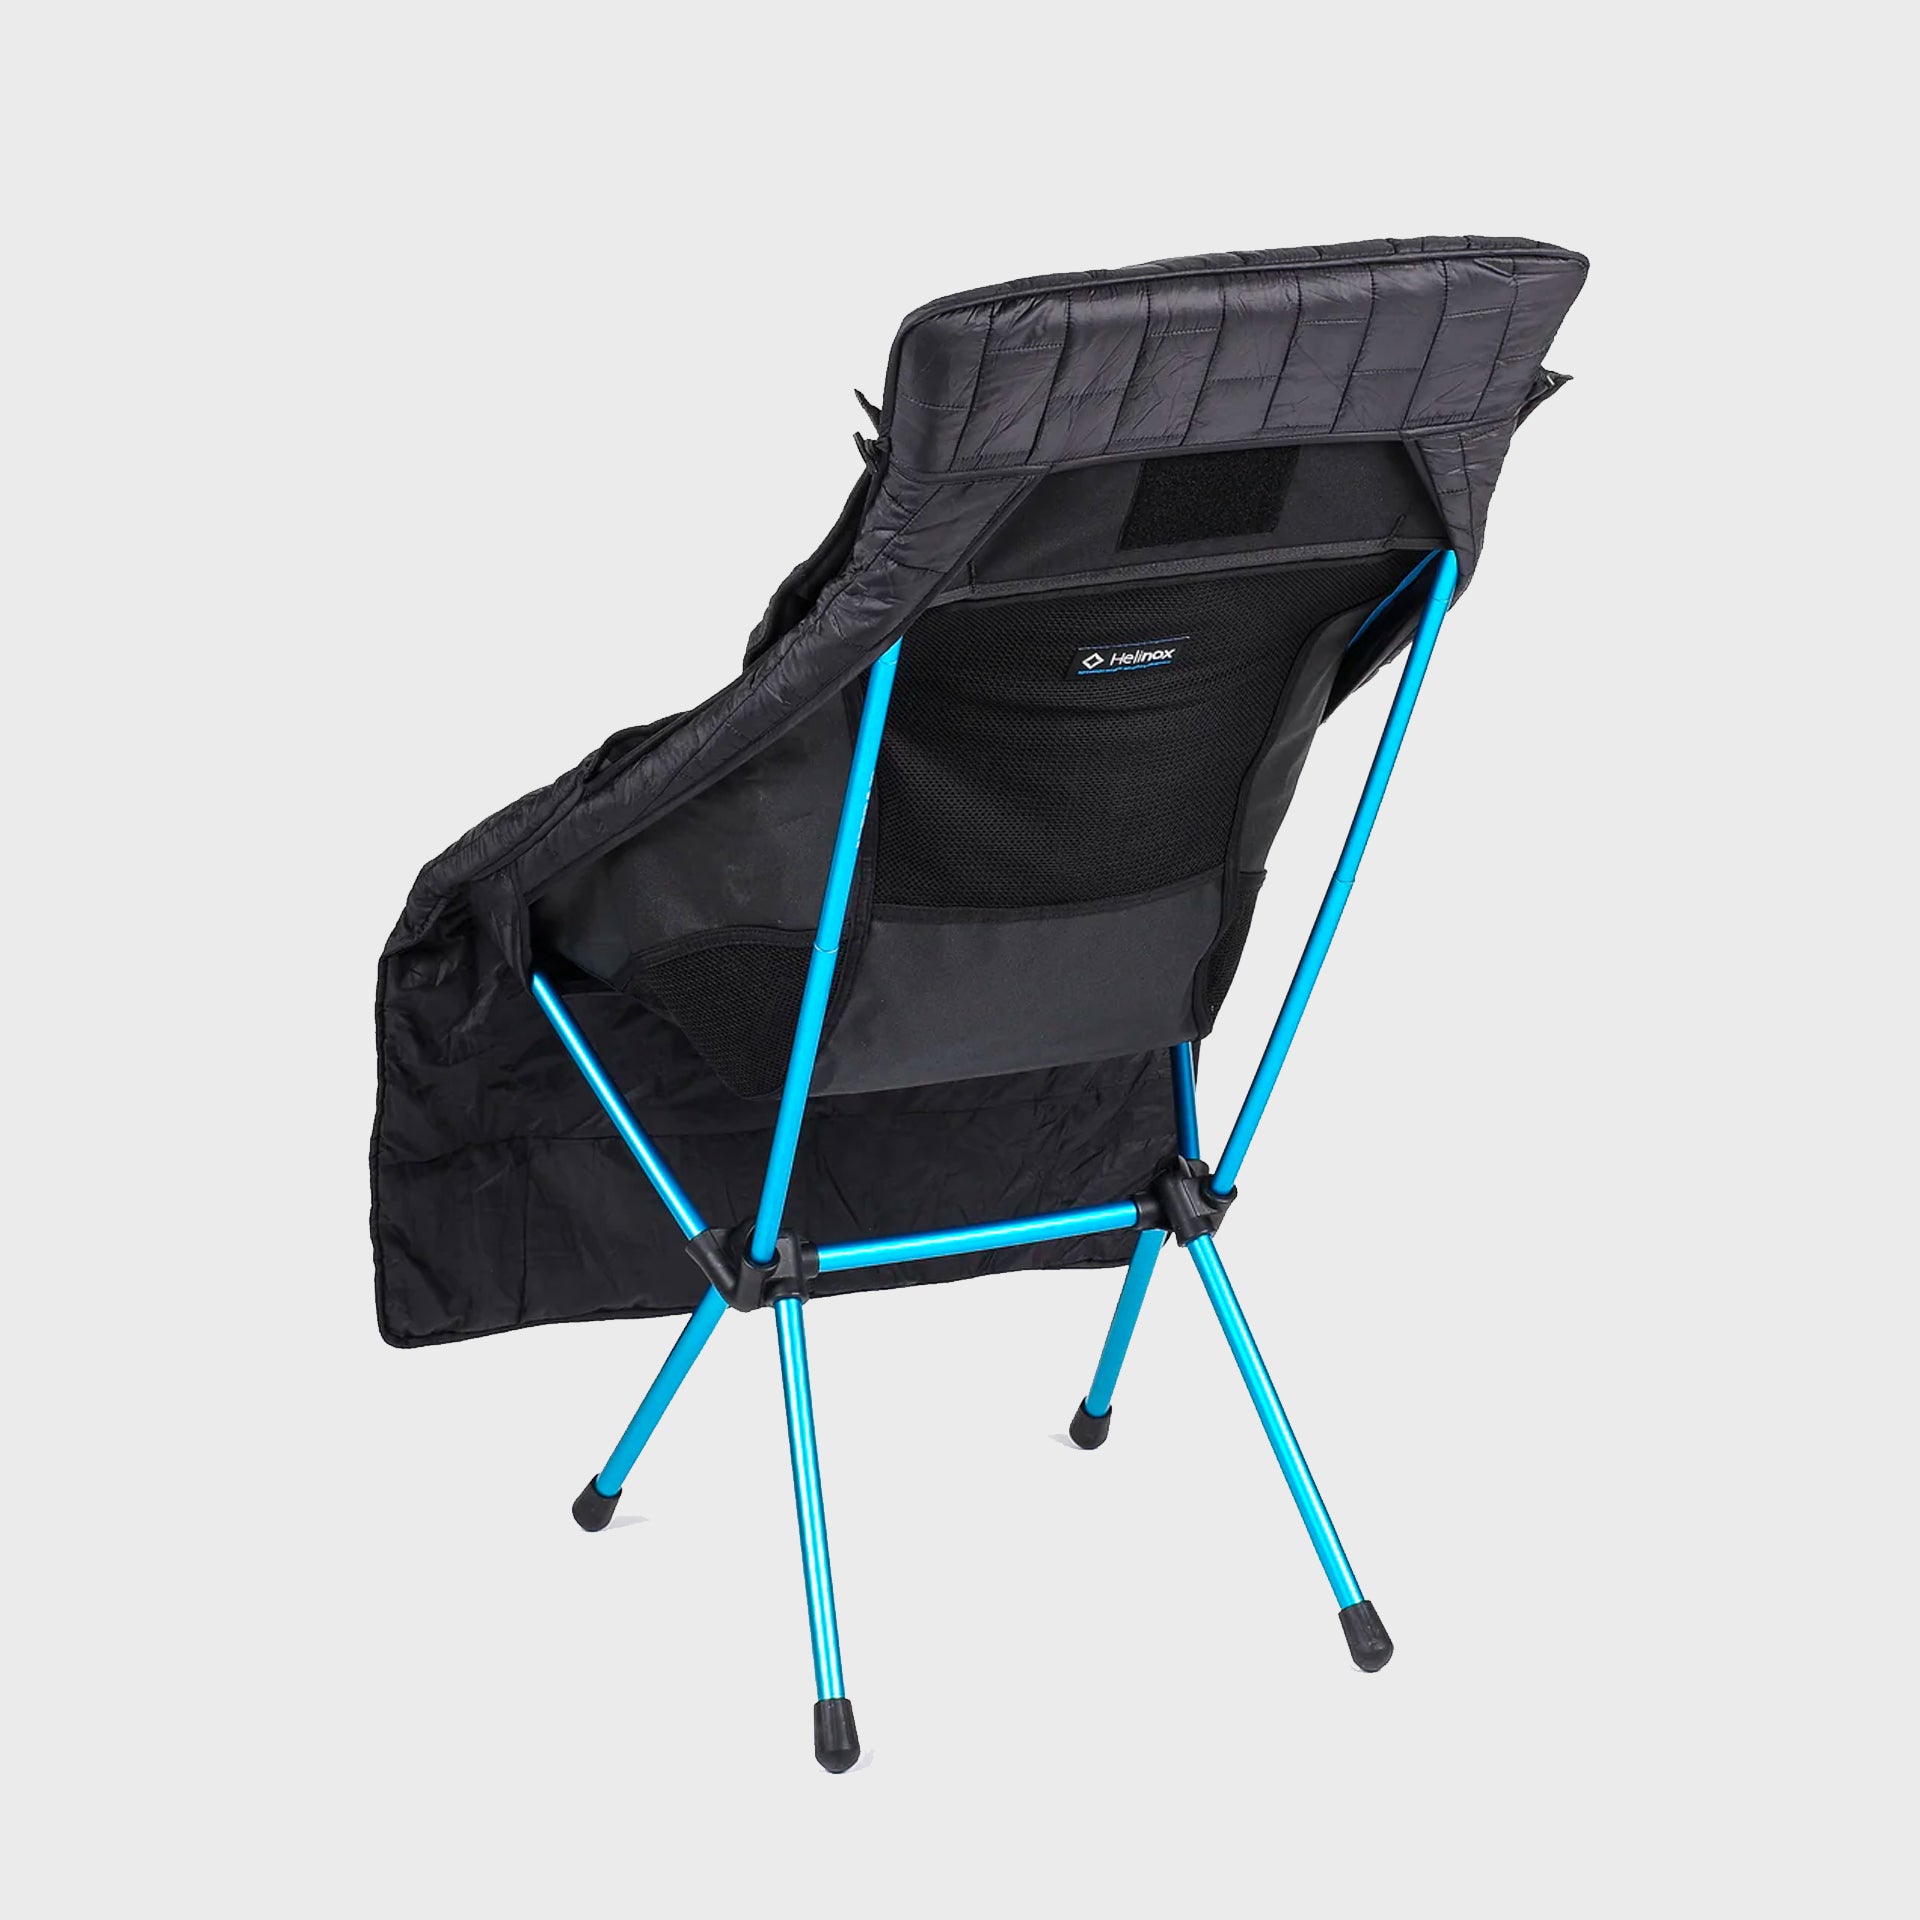 Helinox Toasty for Sunset Chair and Beach Chair - Black - ManGo Surfing